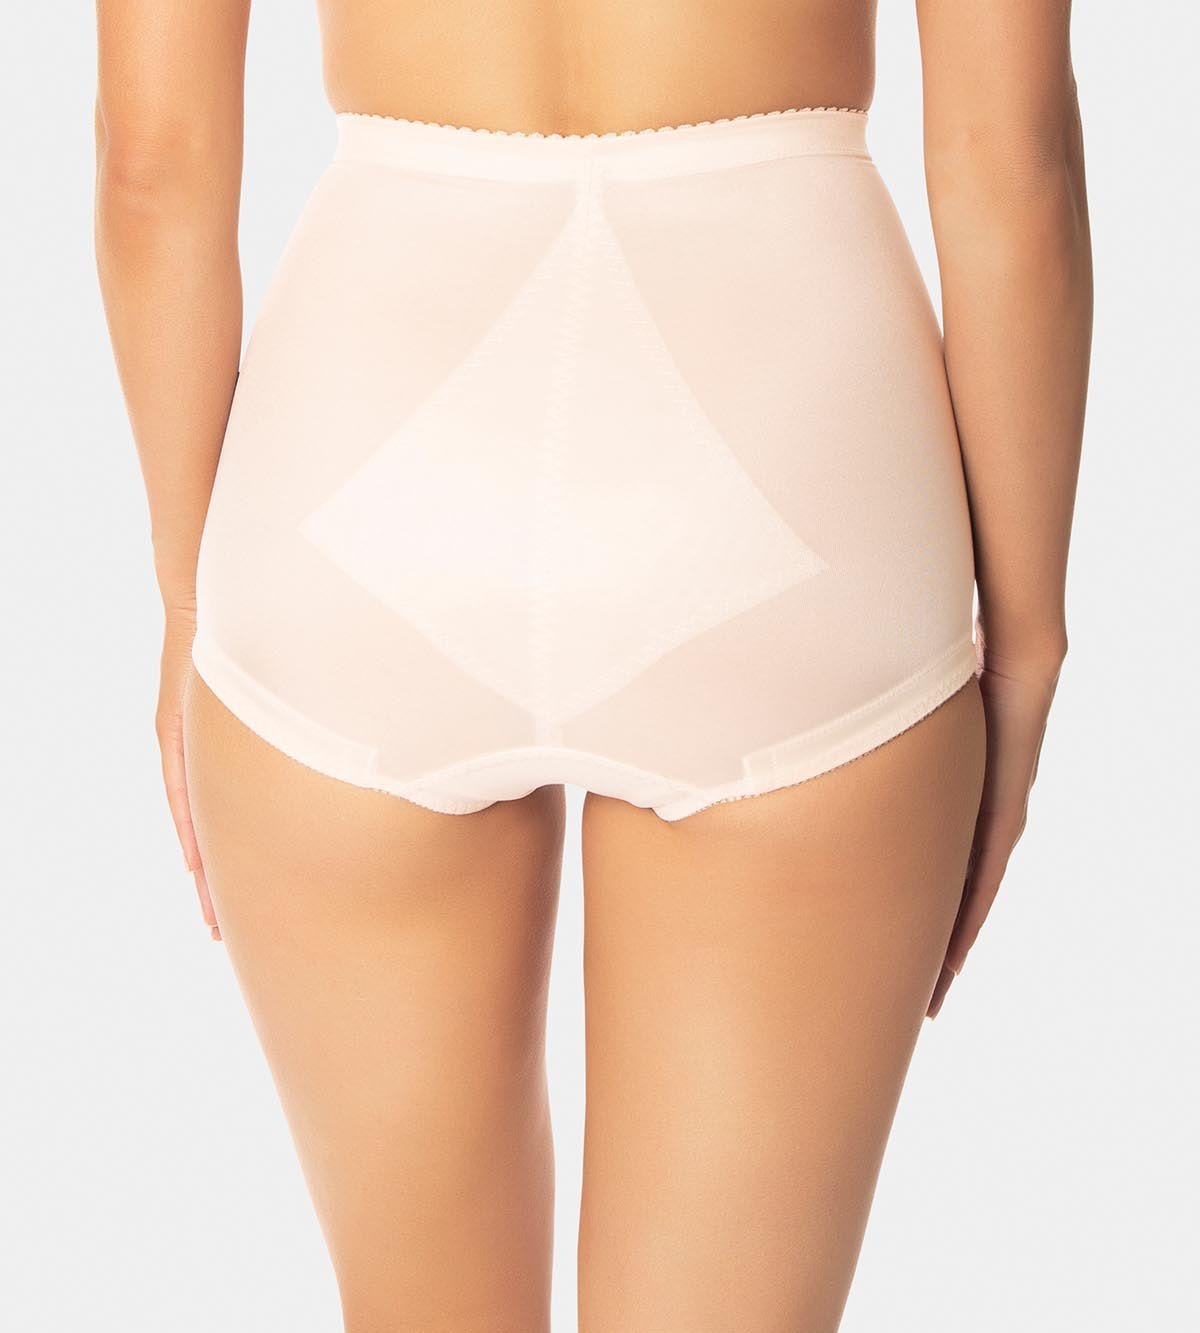 Triumph Belform Panty - Shapewear  Available at Illusions Lingerie